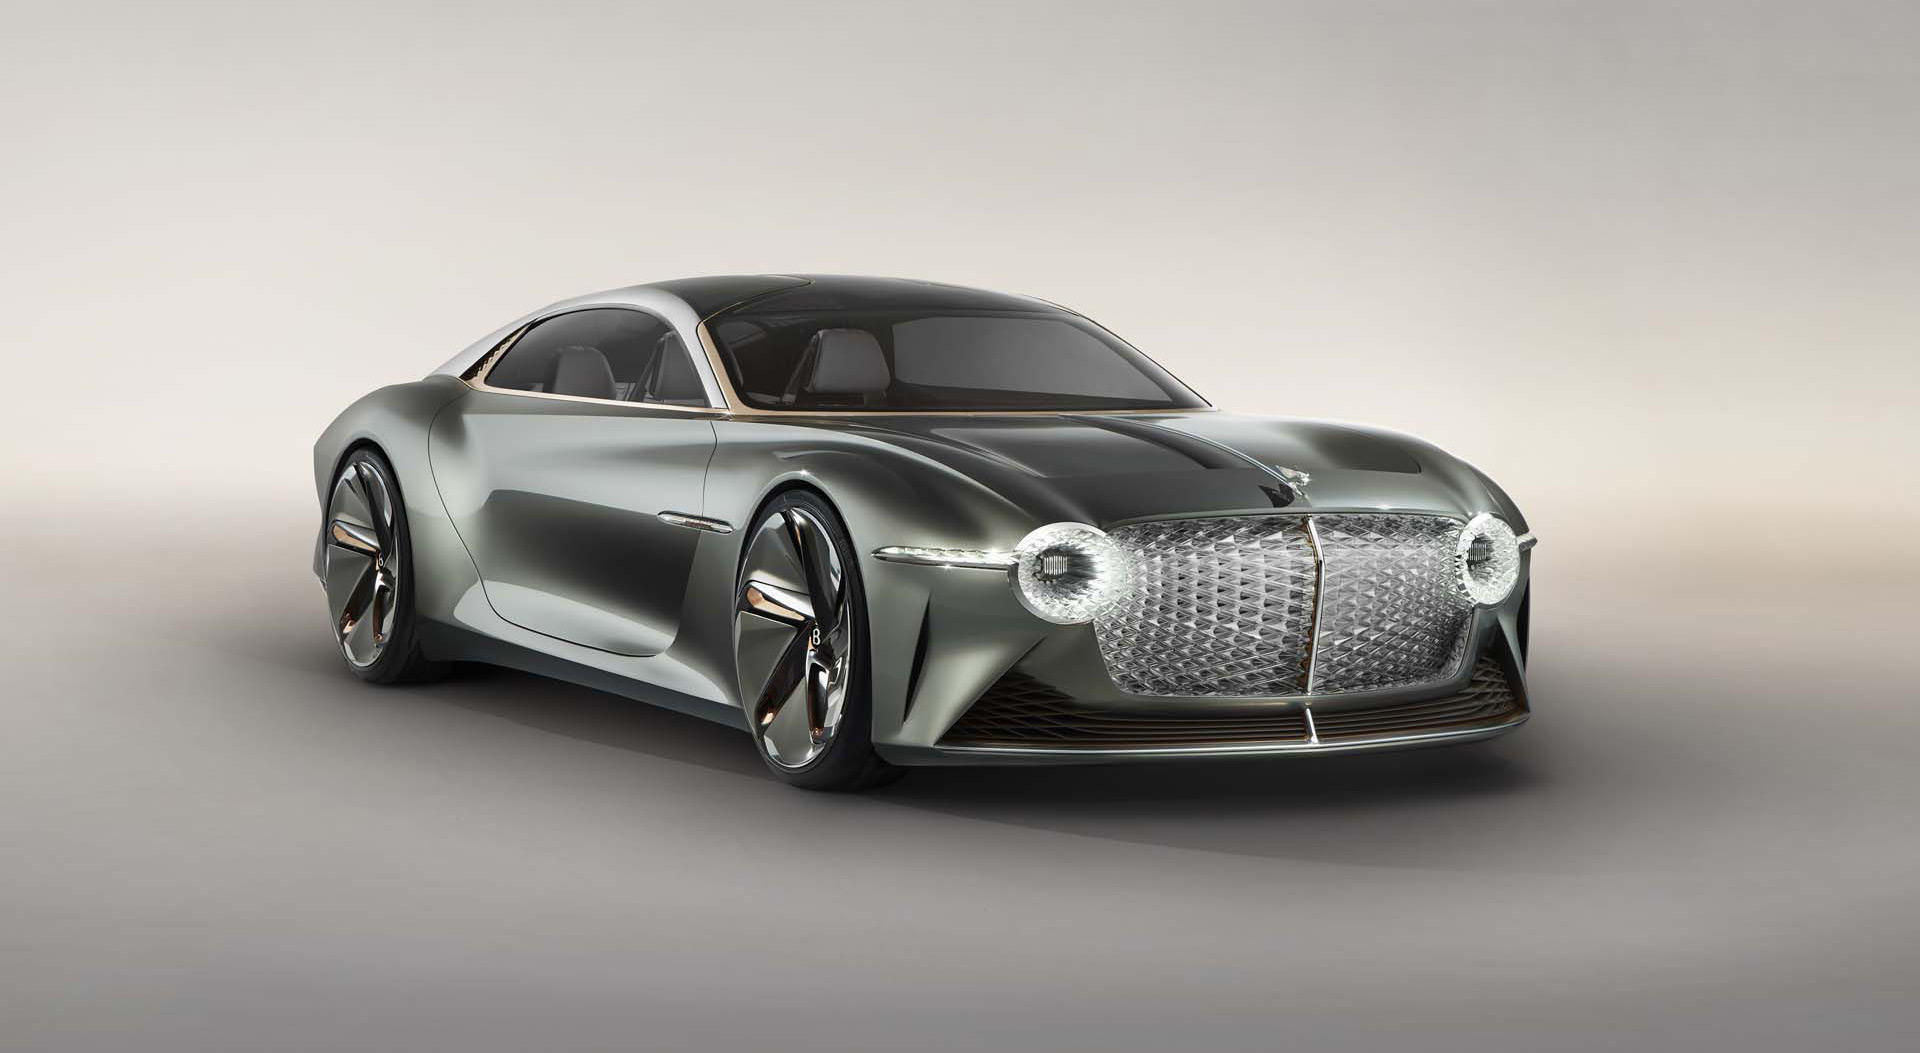 Bentley to launch EV in 2025 on the road to full-electric lineup by 2030